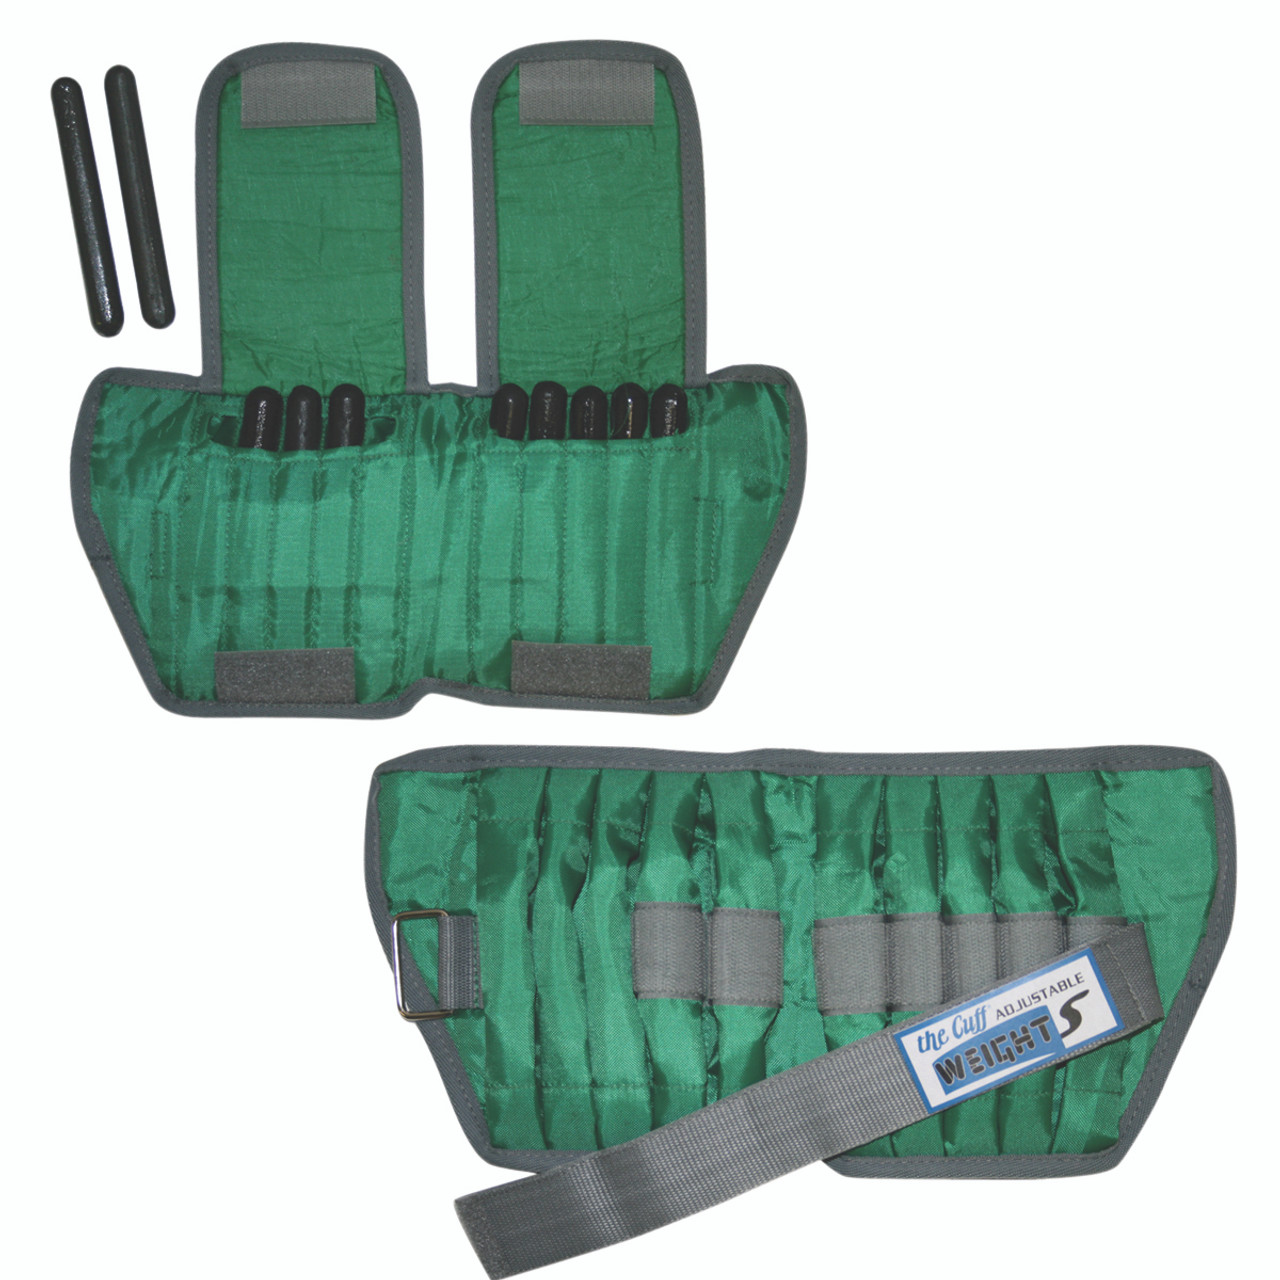 The Adjustable Cuff¨ ankle weight - 5 lb - 10 x 0.5 lb inserts - Green - pair